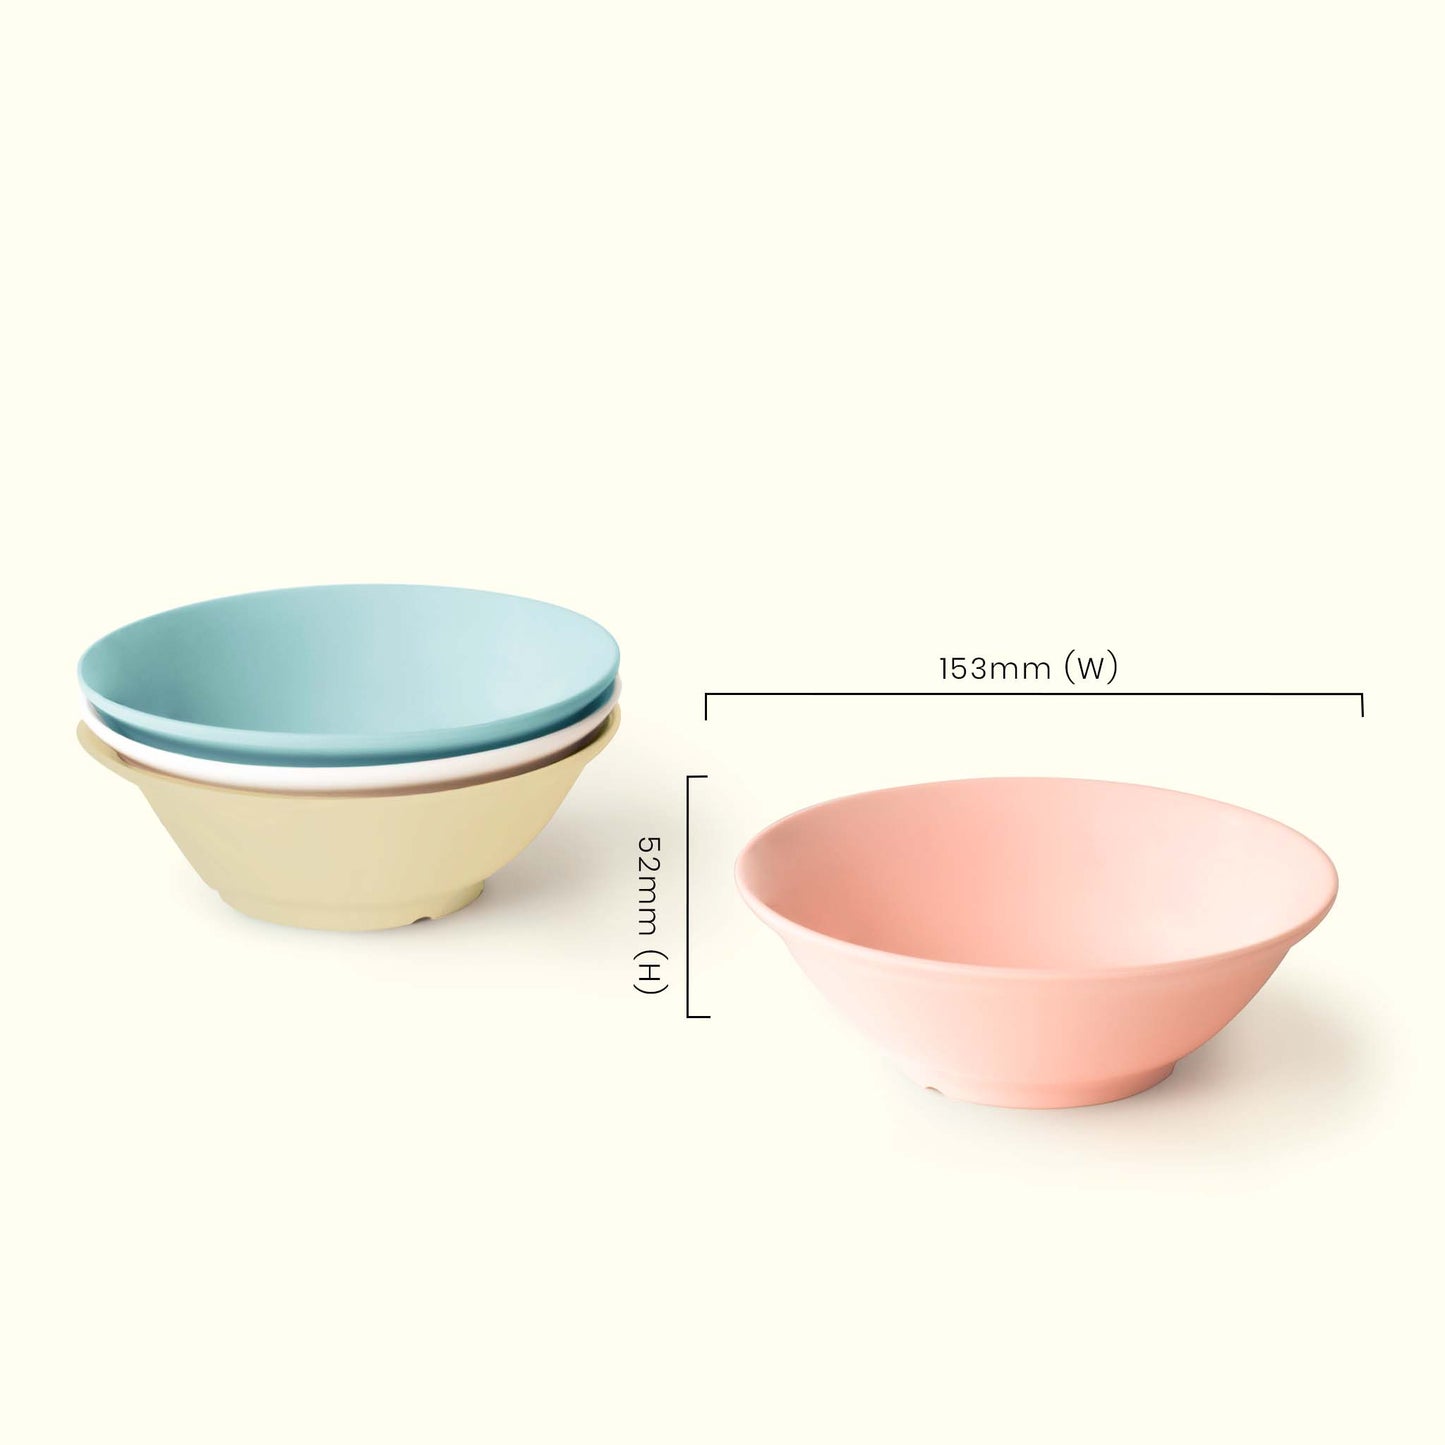 The Plate Story 4 Pcs Children Bowl Set with Mixed Colours